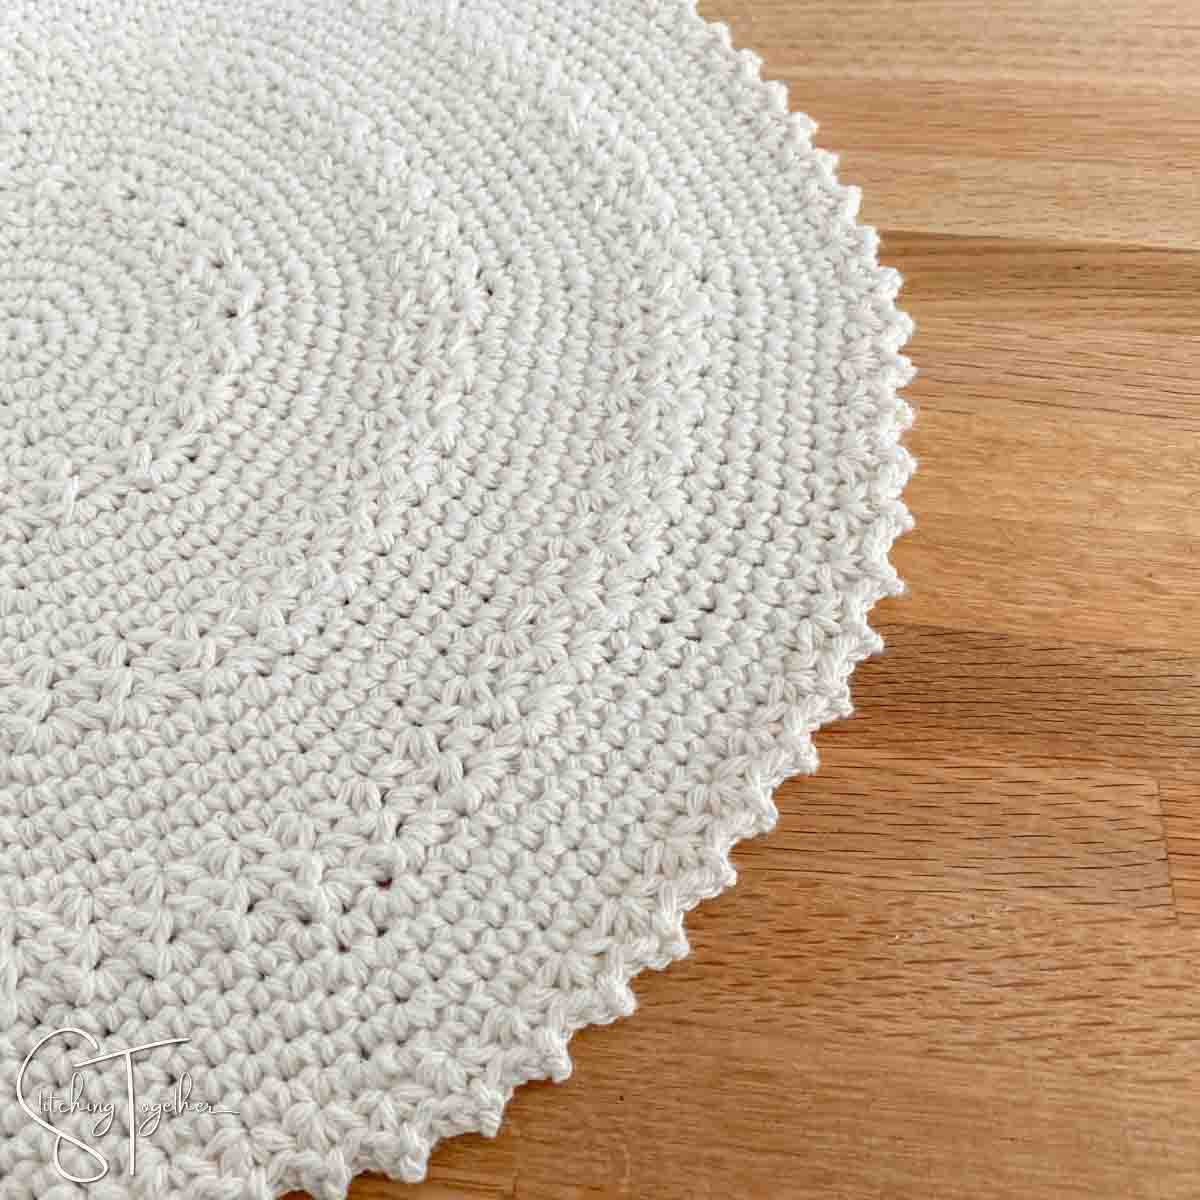 partial view of a crochet round placemat laying flat